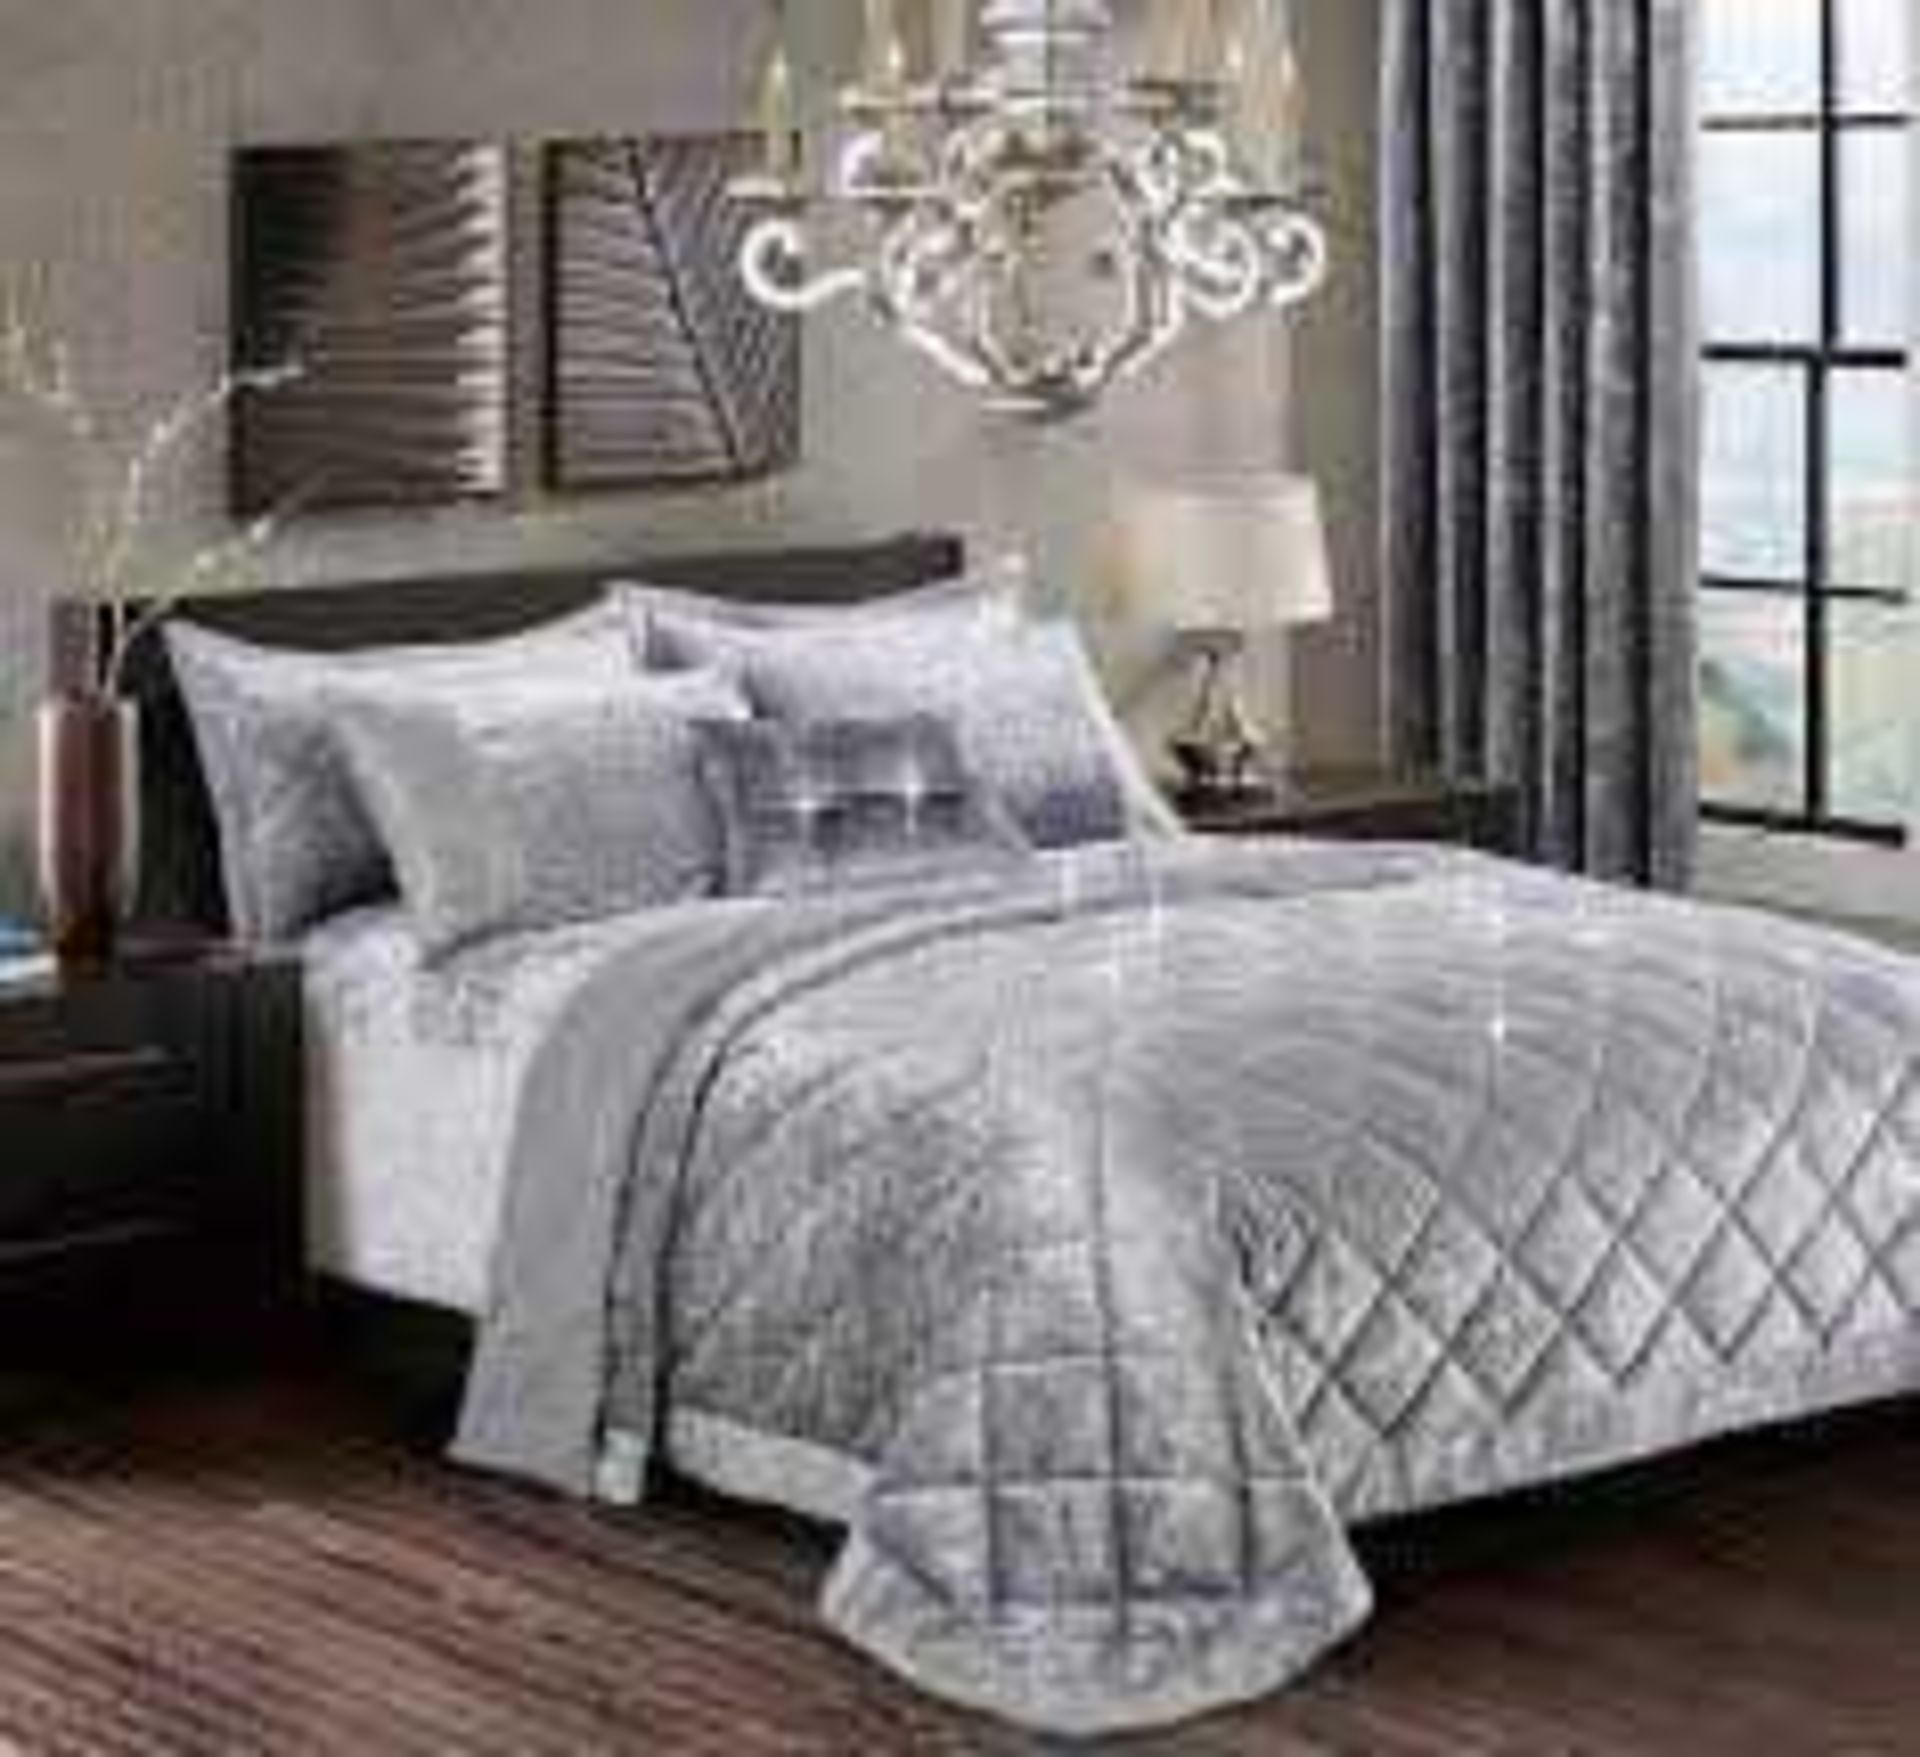 RRP £70 Brand New Bagged Prime Linens Luxurious And Stylish Bedspread Set In Crushed Velvet